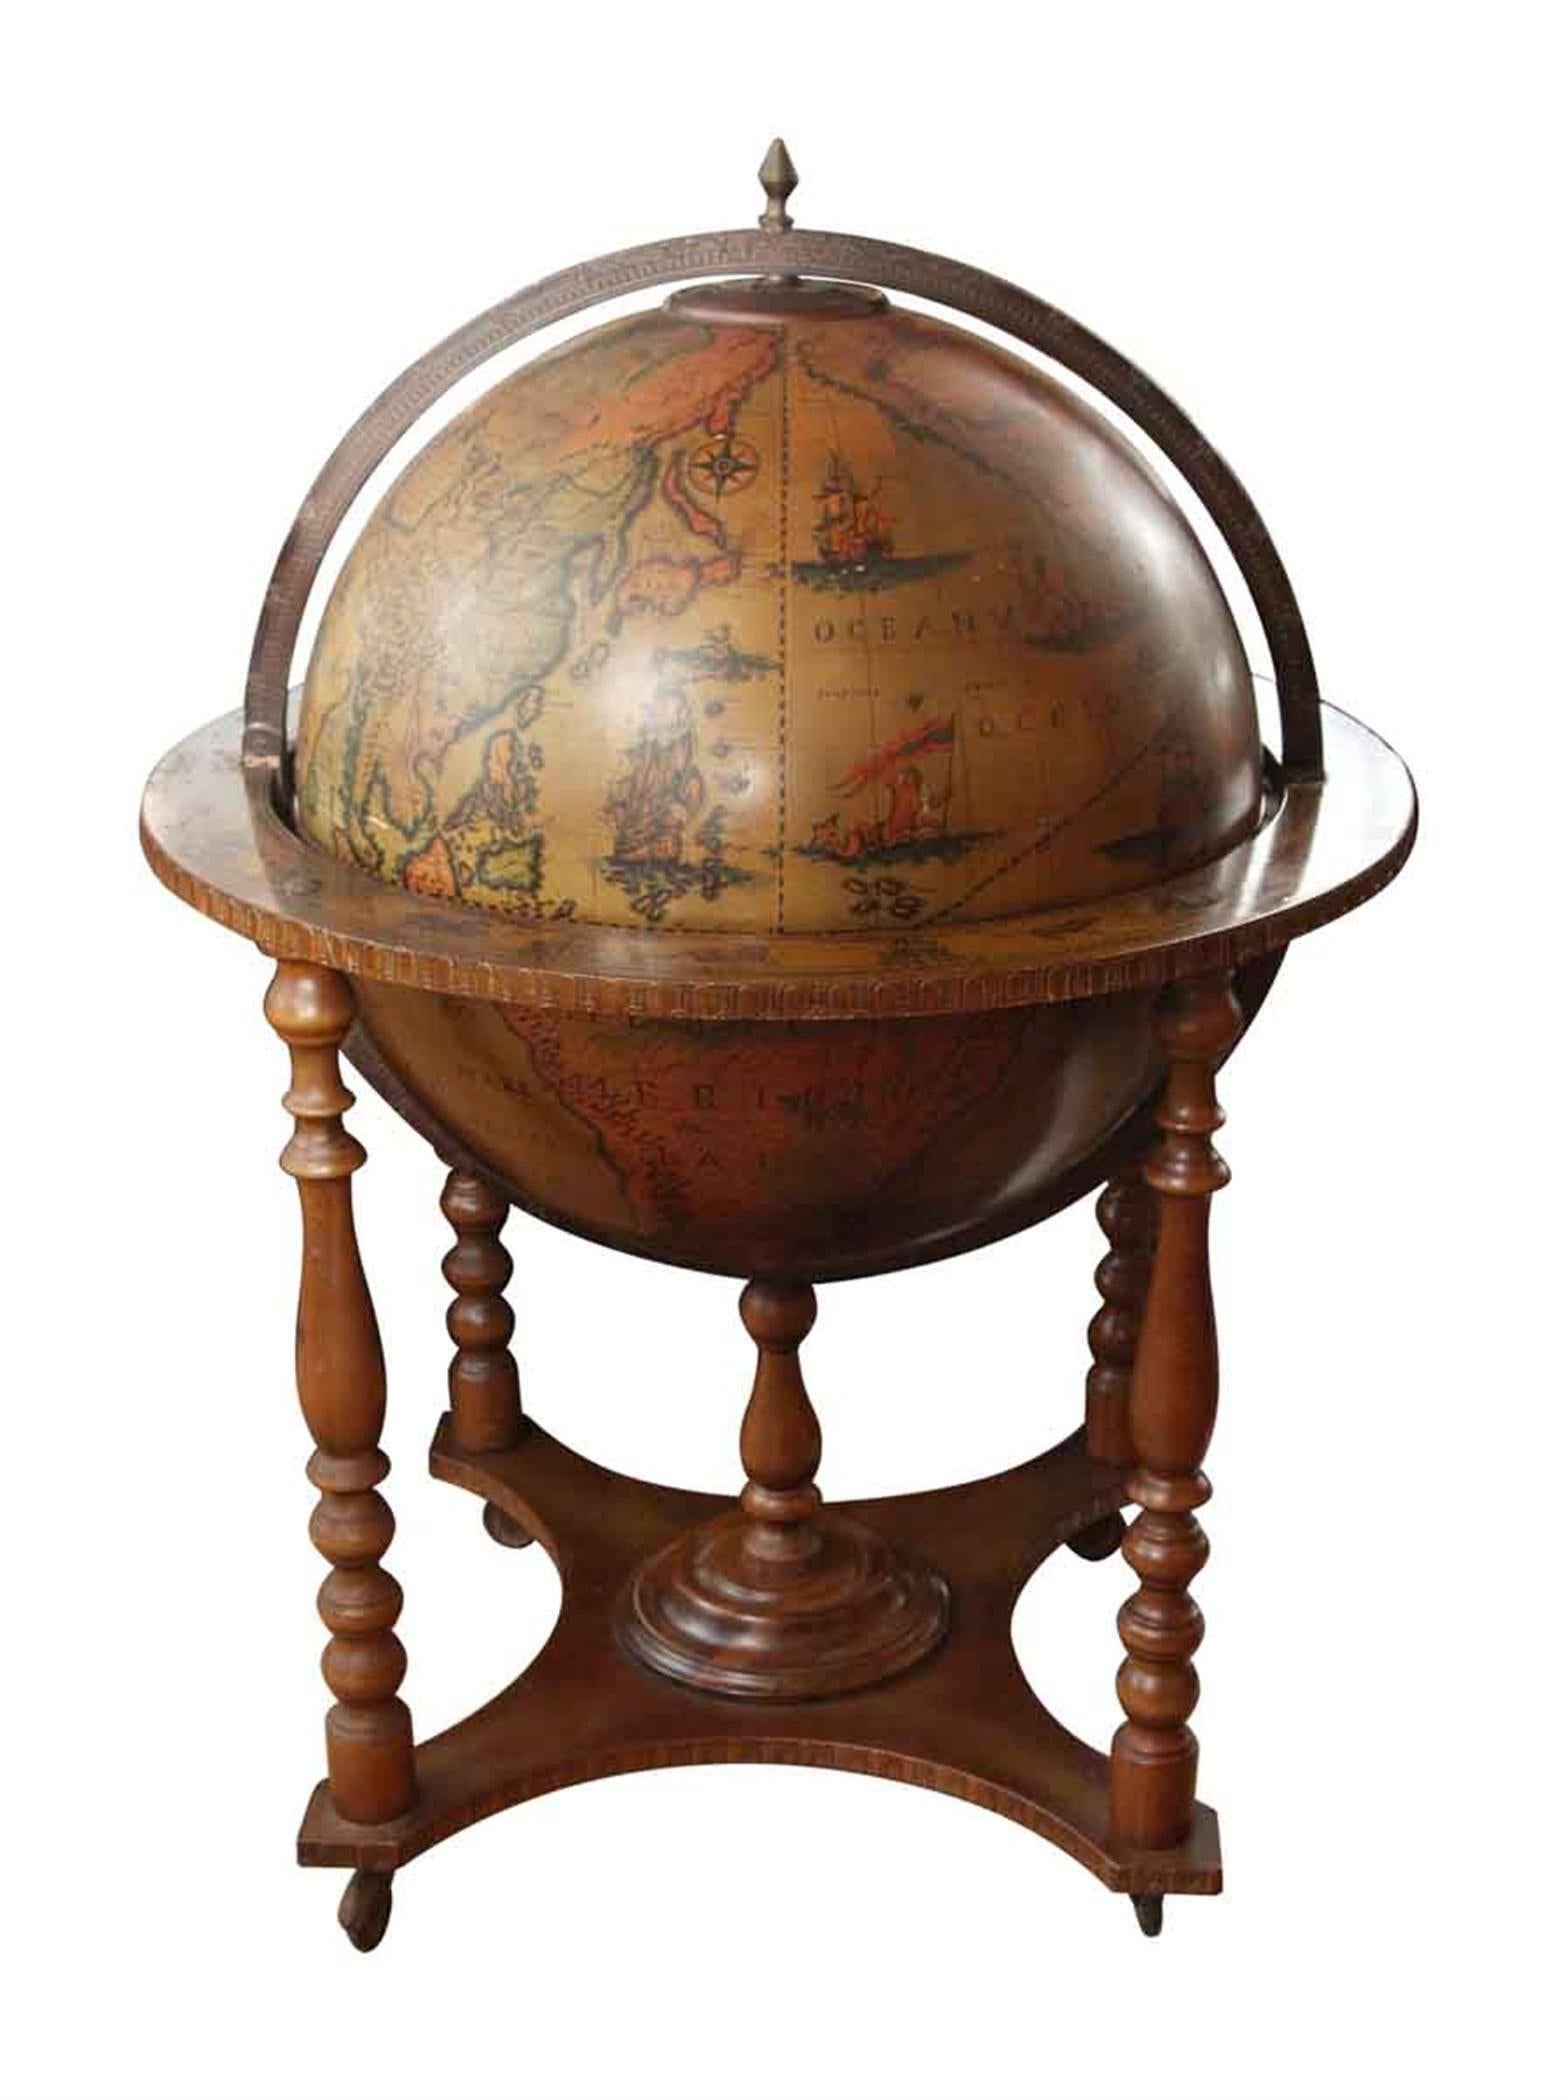 1970s Italian Renaissance style standing world globe enclosed in an ornately decorated wooden stand. Stylized continents on the outside and sky constellations inside. The globe opens to reveal a spacious rotating dry bar inside. This can be seen at